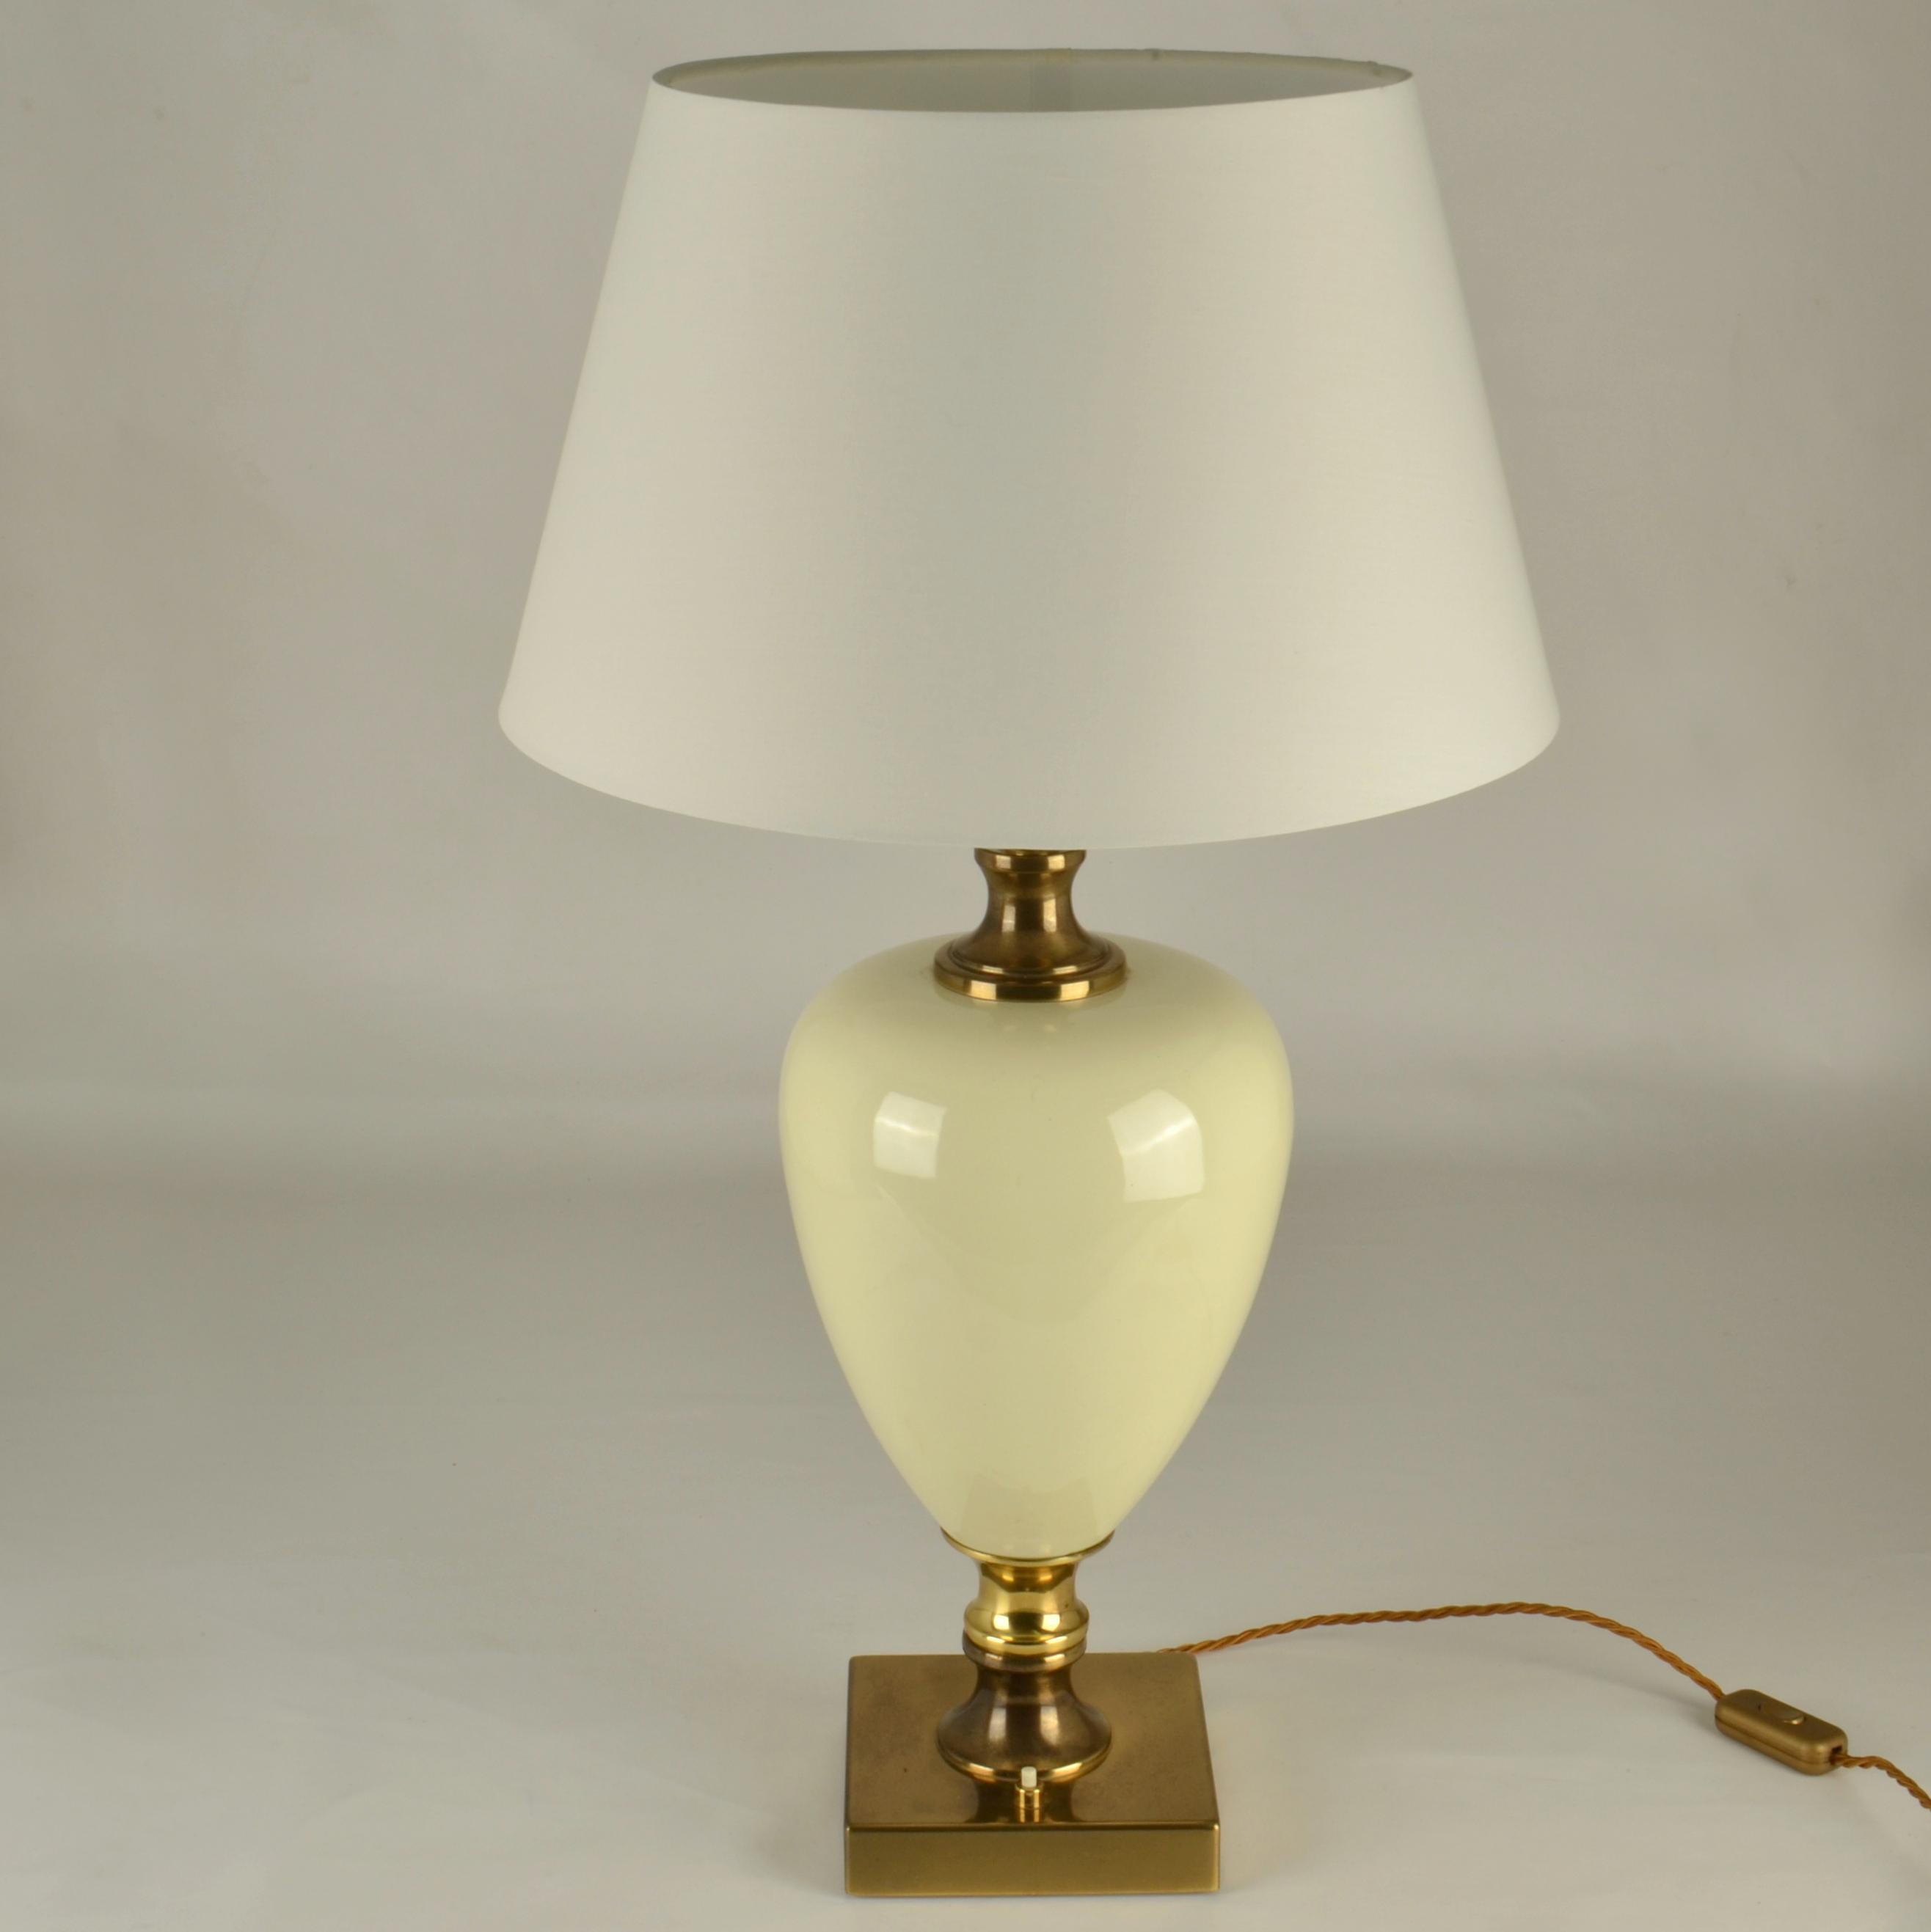 Pair of Cream Porcelain and Brass Table Lamps by Zonca, Italy, 1970s For Sale 7